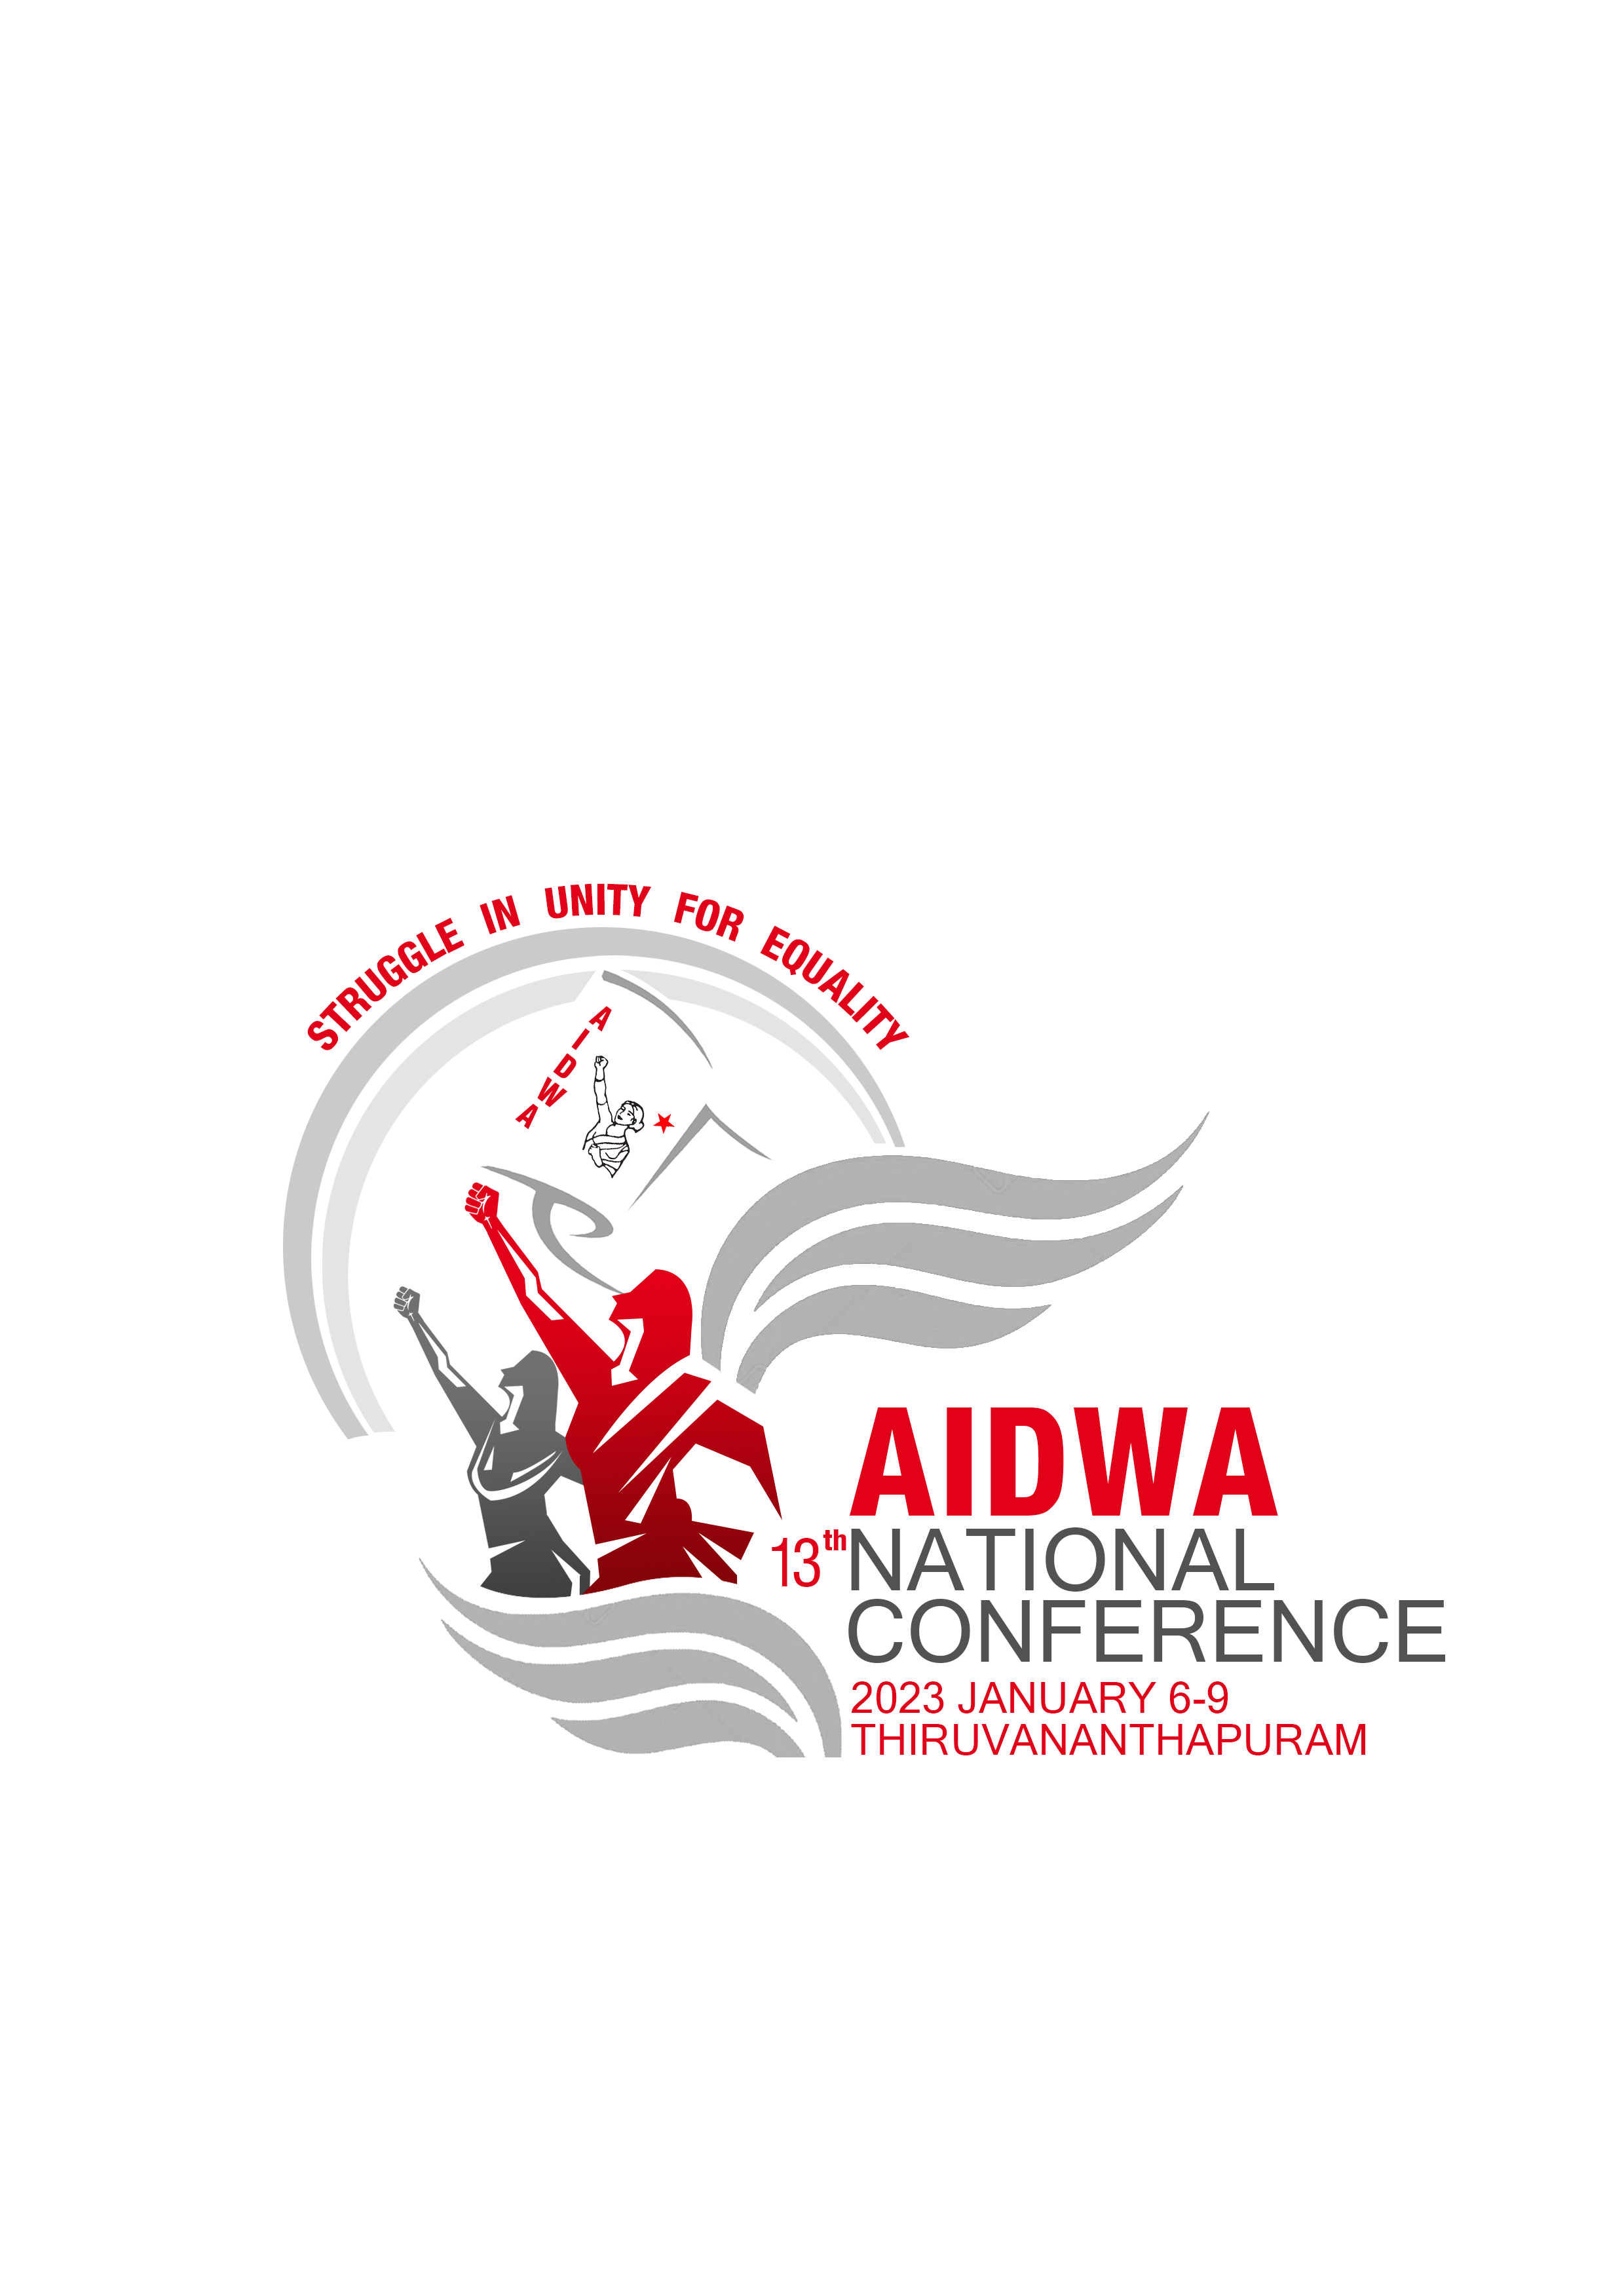 AIDWA 13TH All India Conference - “STRUGGLE IN UNITY FOR EQUALITY” 